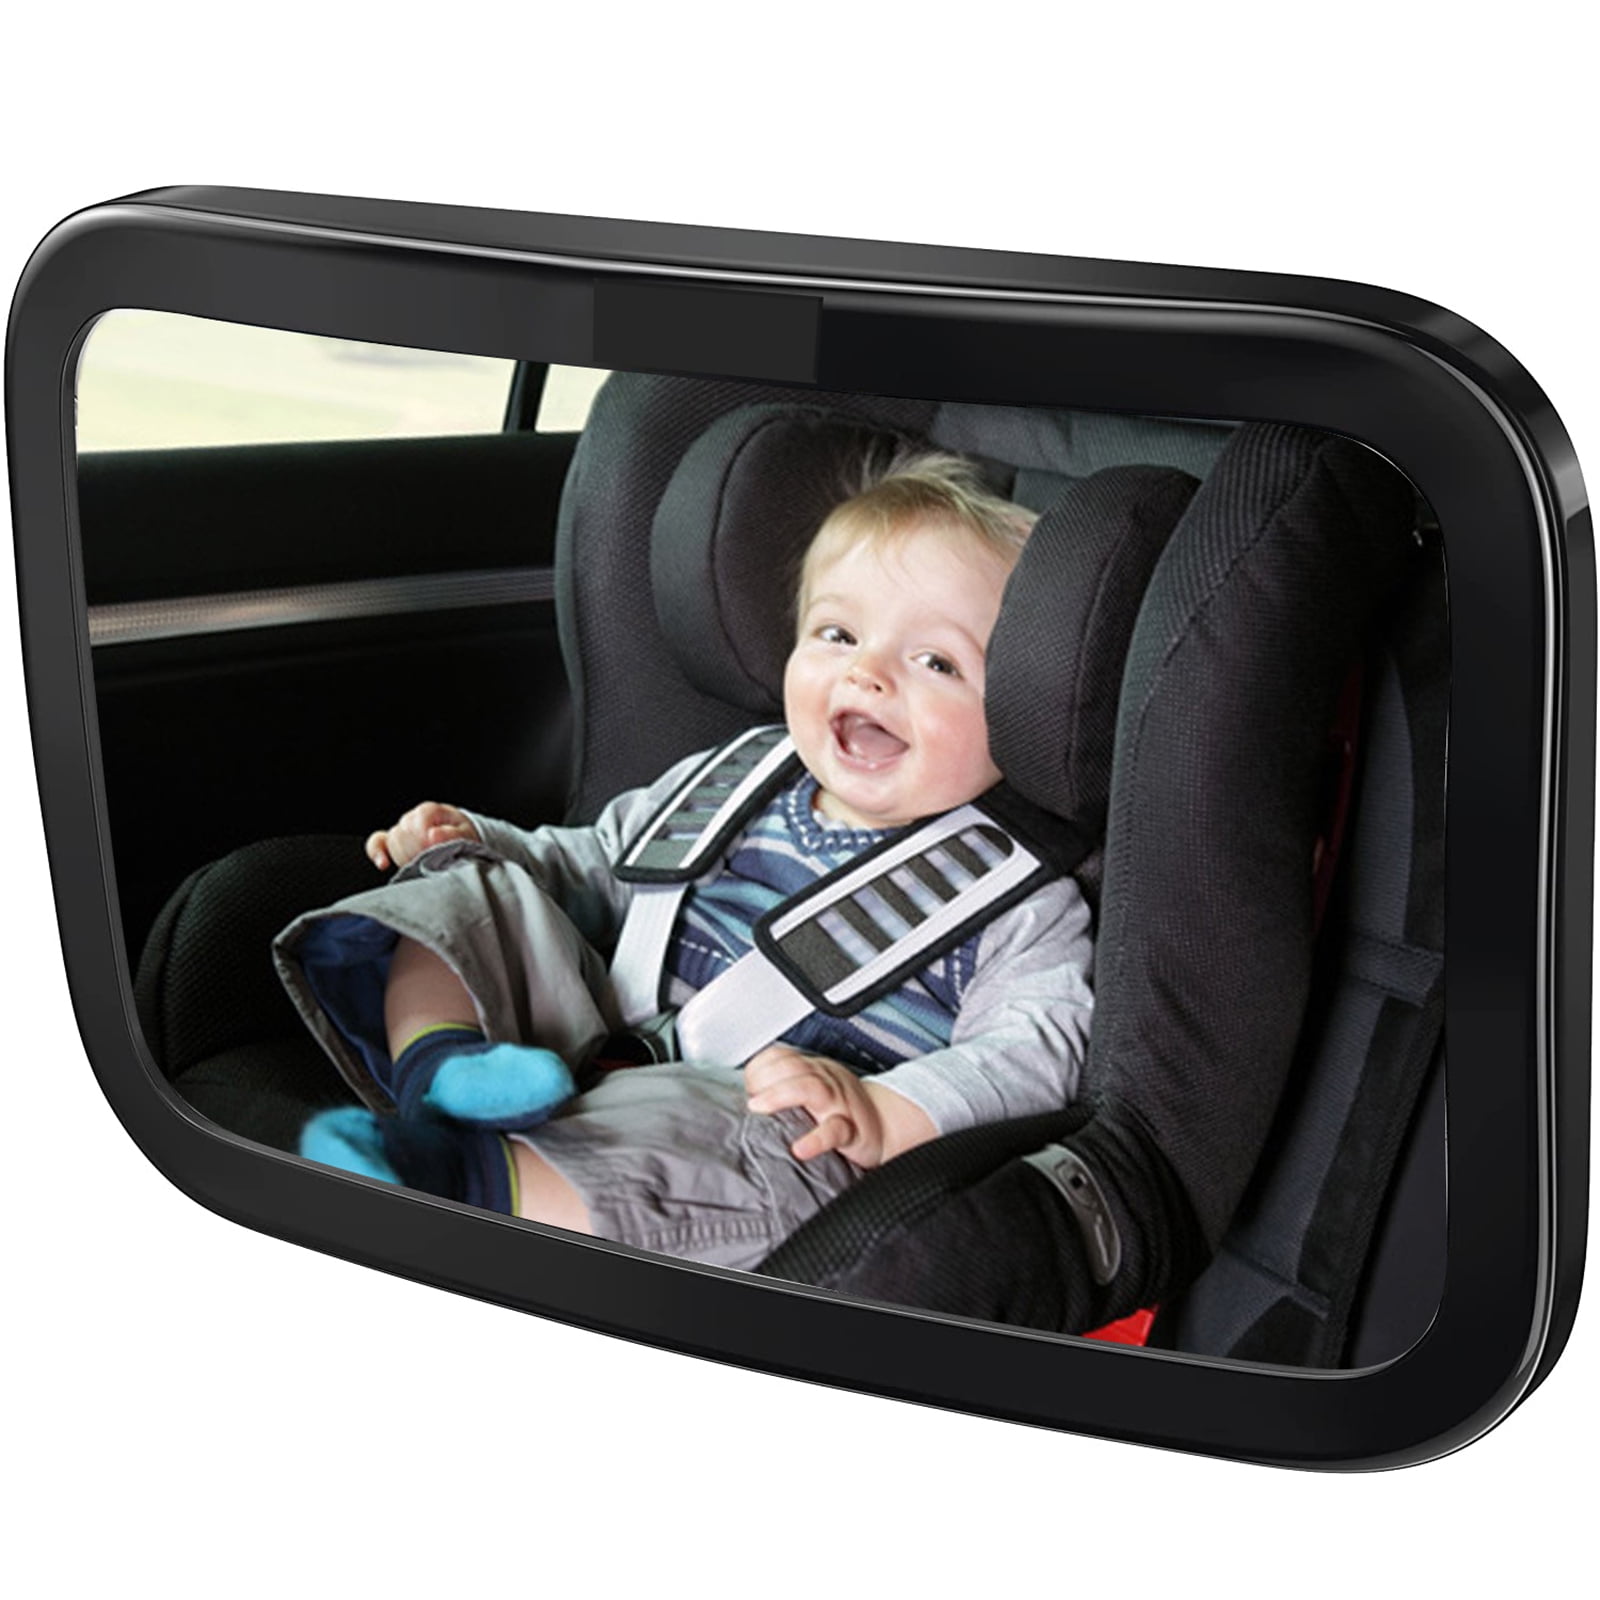 Prince Lionheart Child View Baby Rear Facing Car Seat Safety Mirror  Black/Grey 